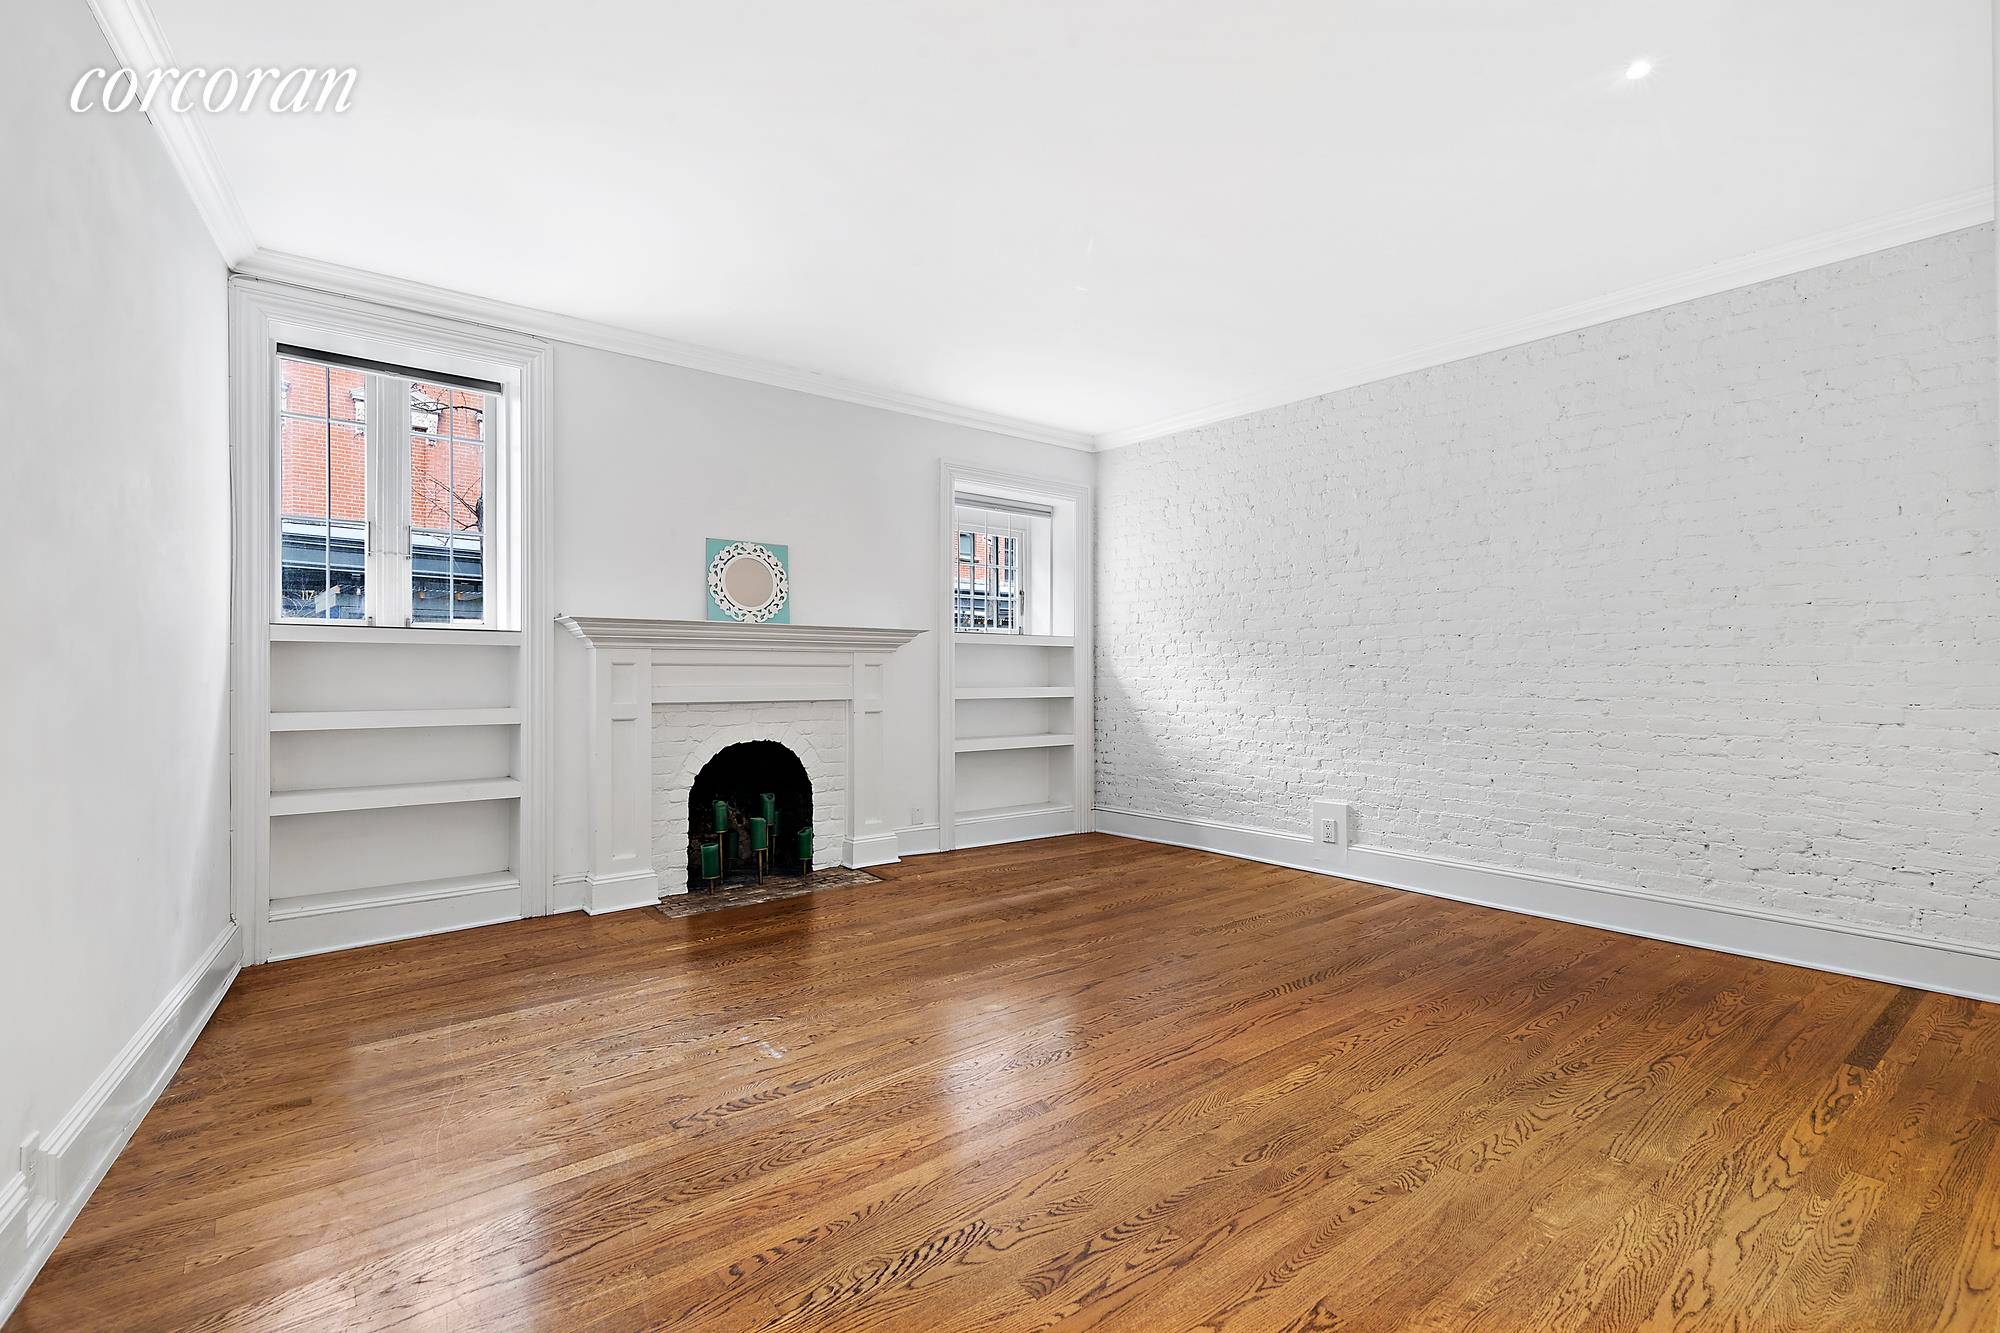 Adorable west village 1 bedroom with 2 decorative fireplaces, exposed brick, a renovated bathroom, hardwood floors located in a historic co op.